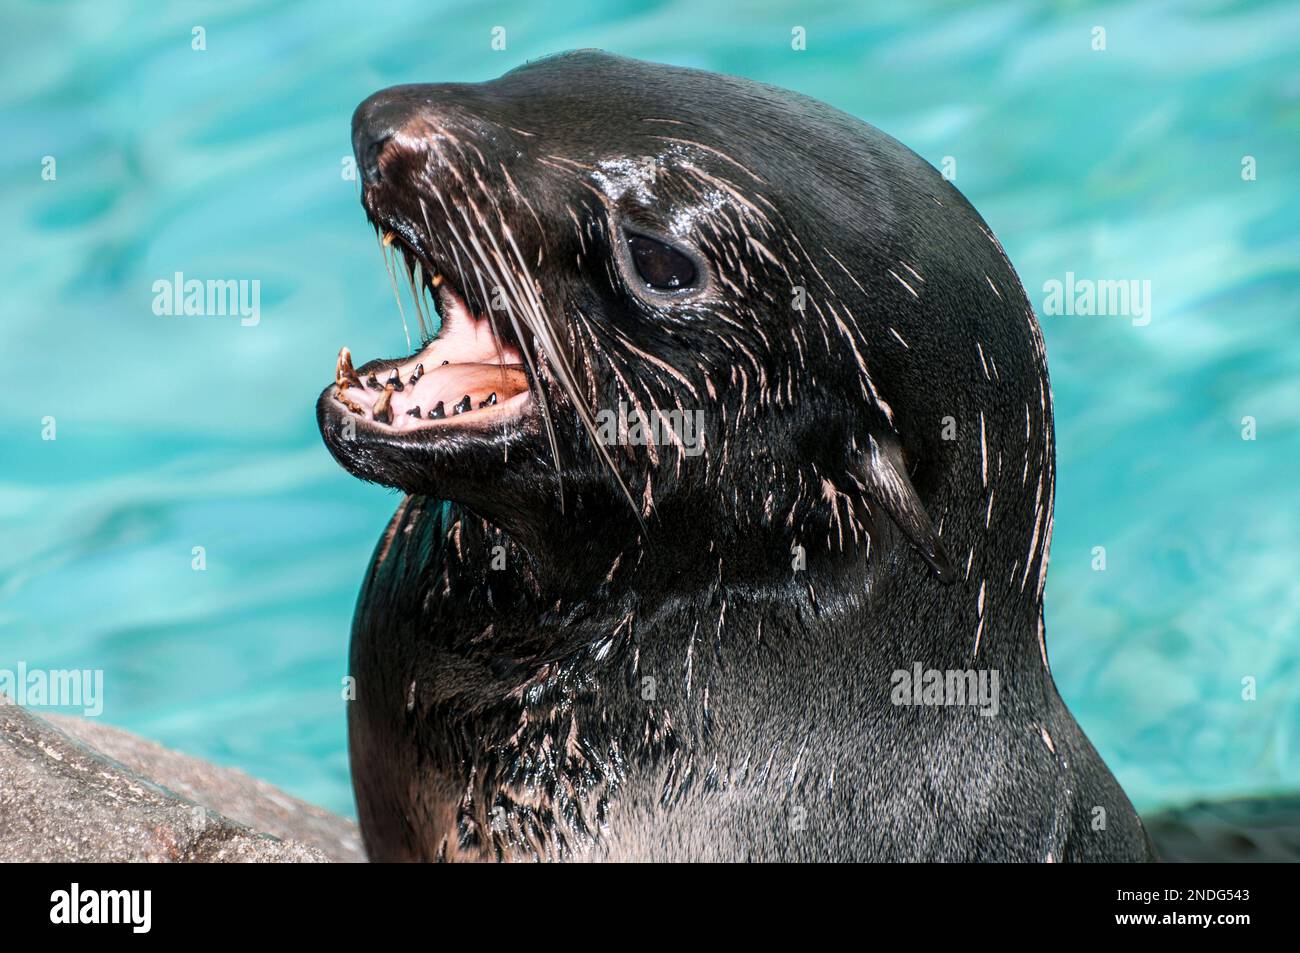 Northern fur seal, close-up with mouth open Stock Photo